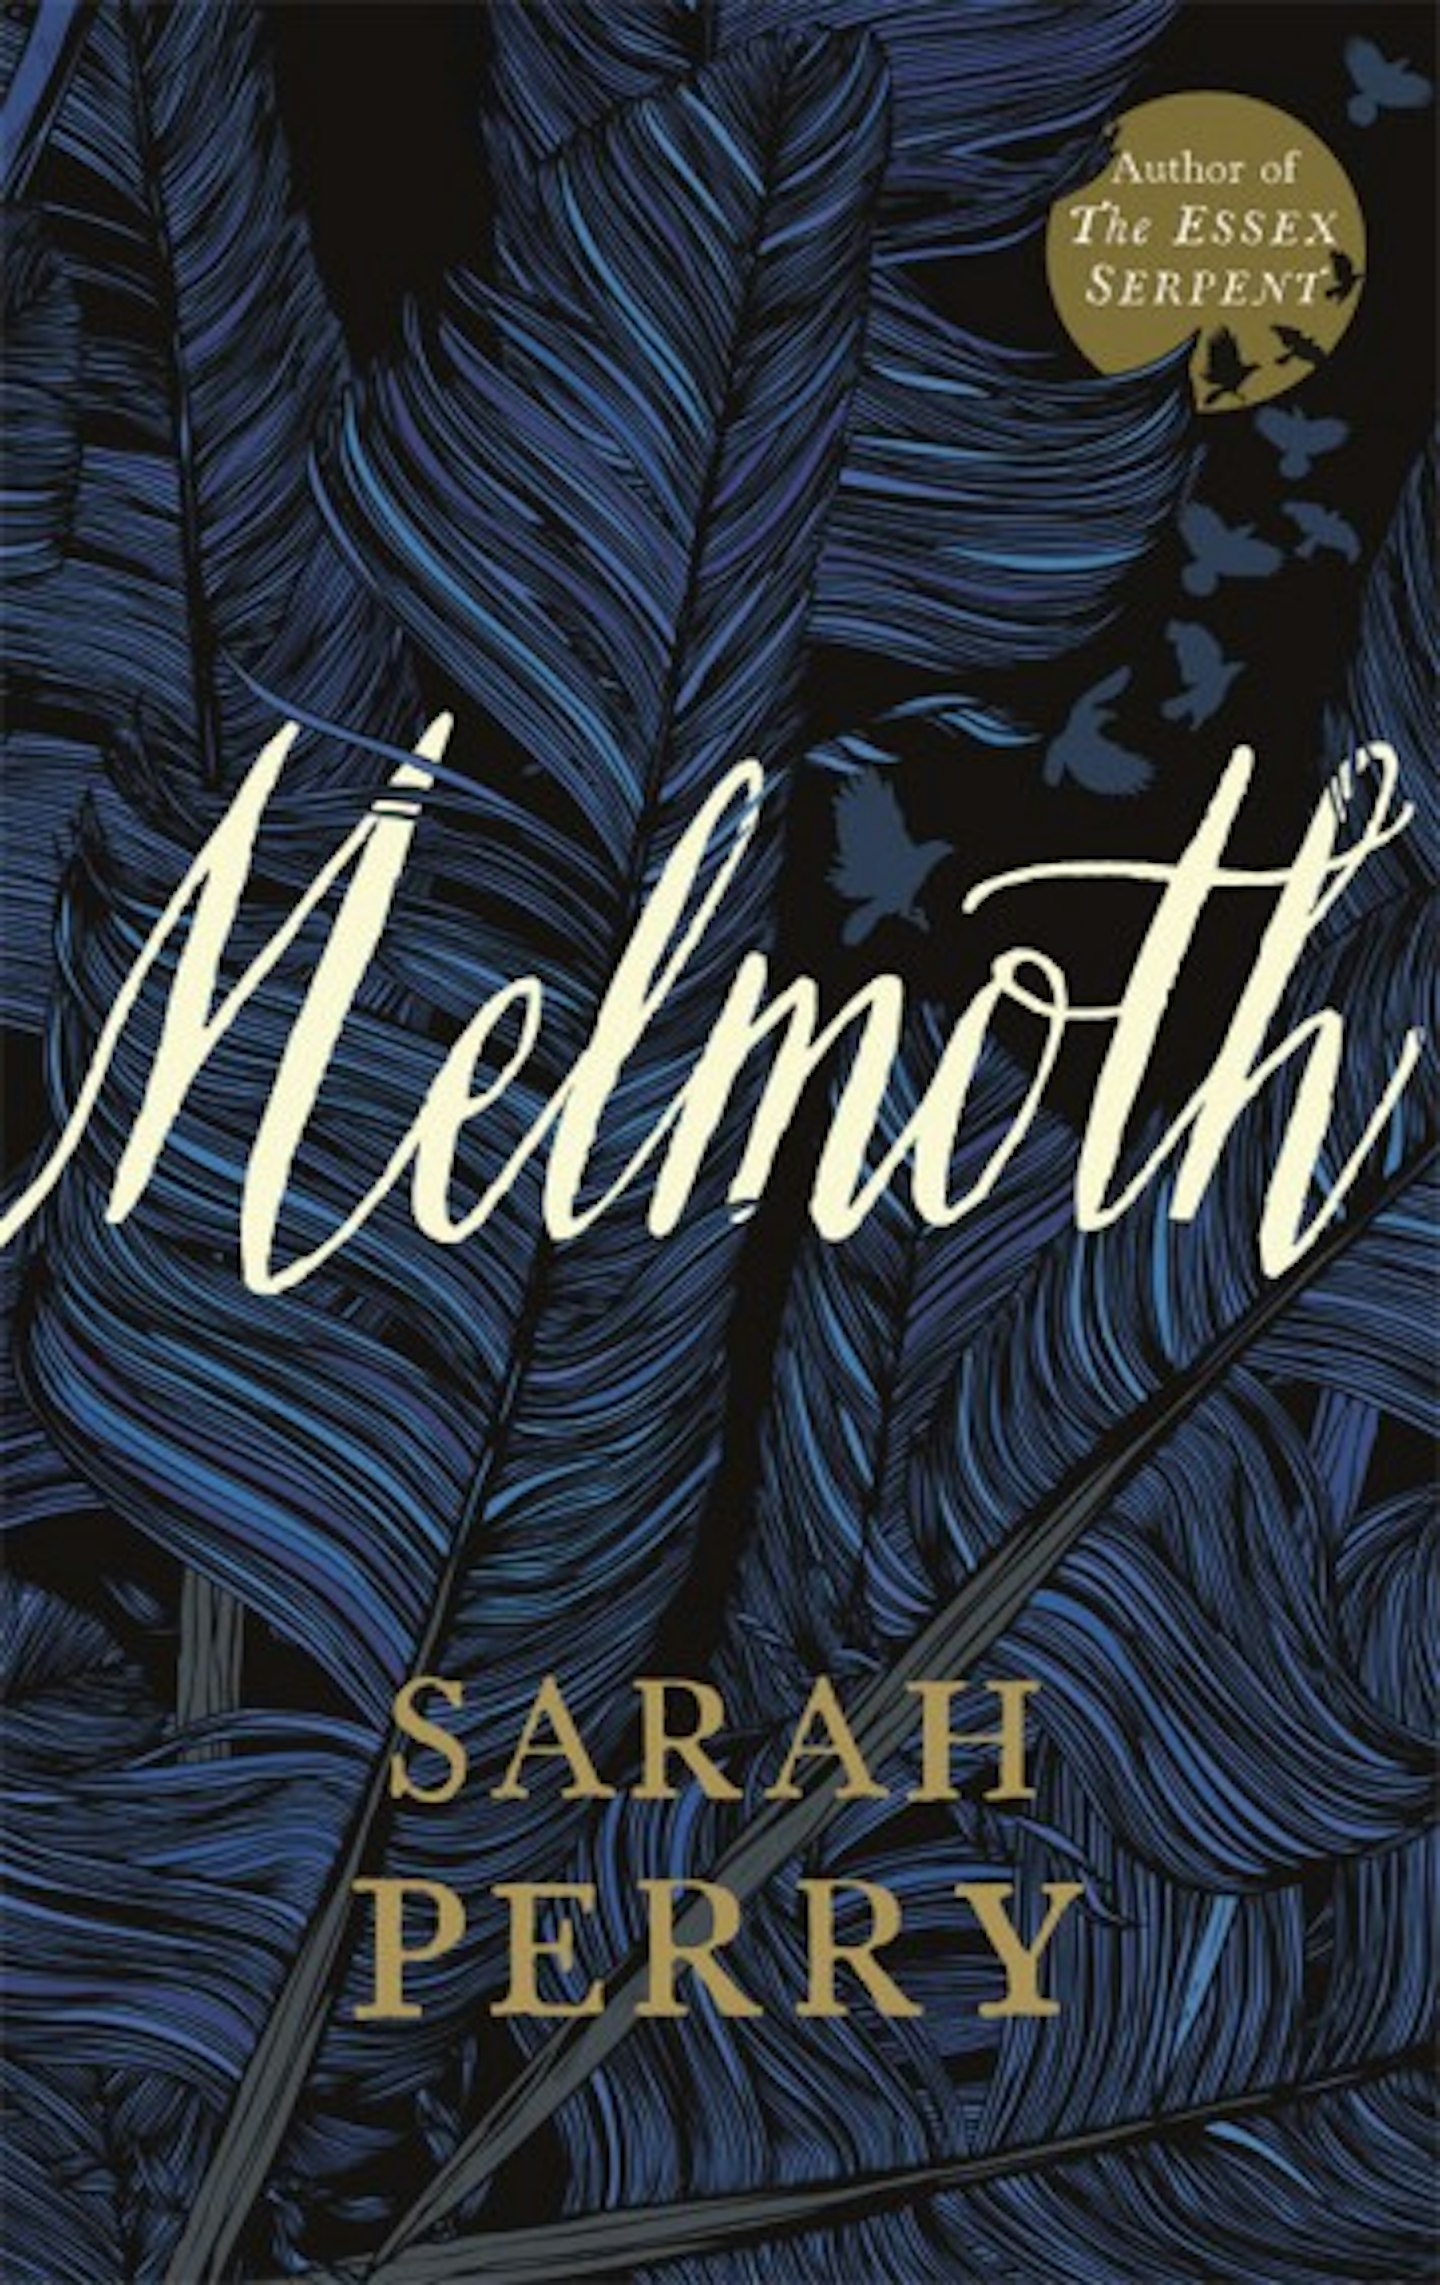 Melmoth - Sarah Perry (Serpents Tail)